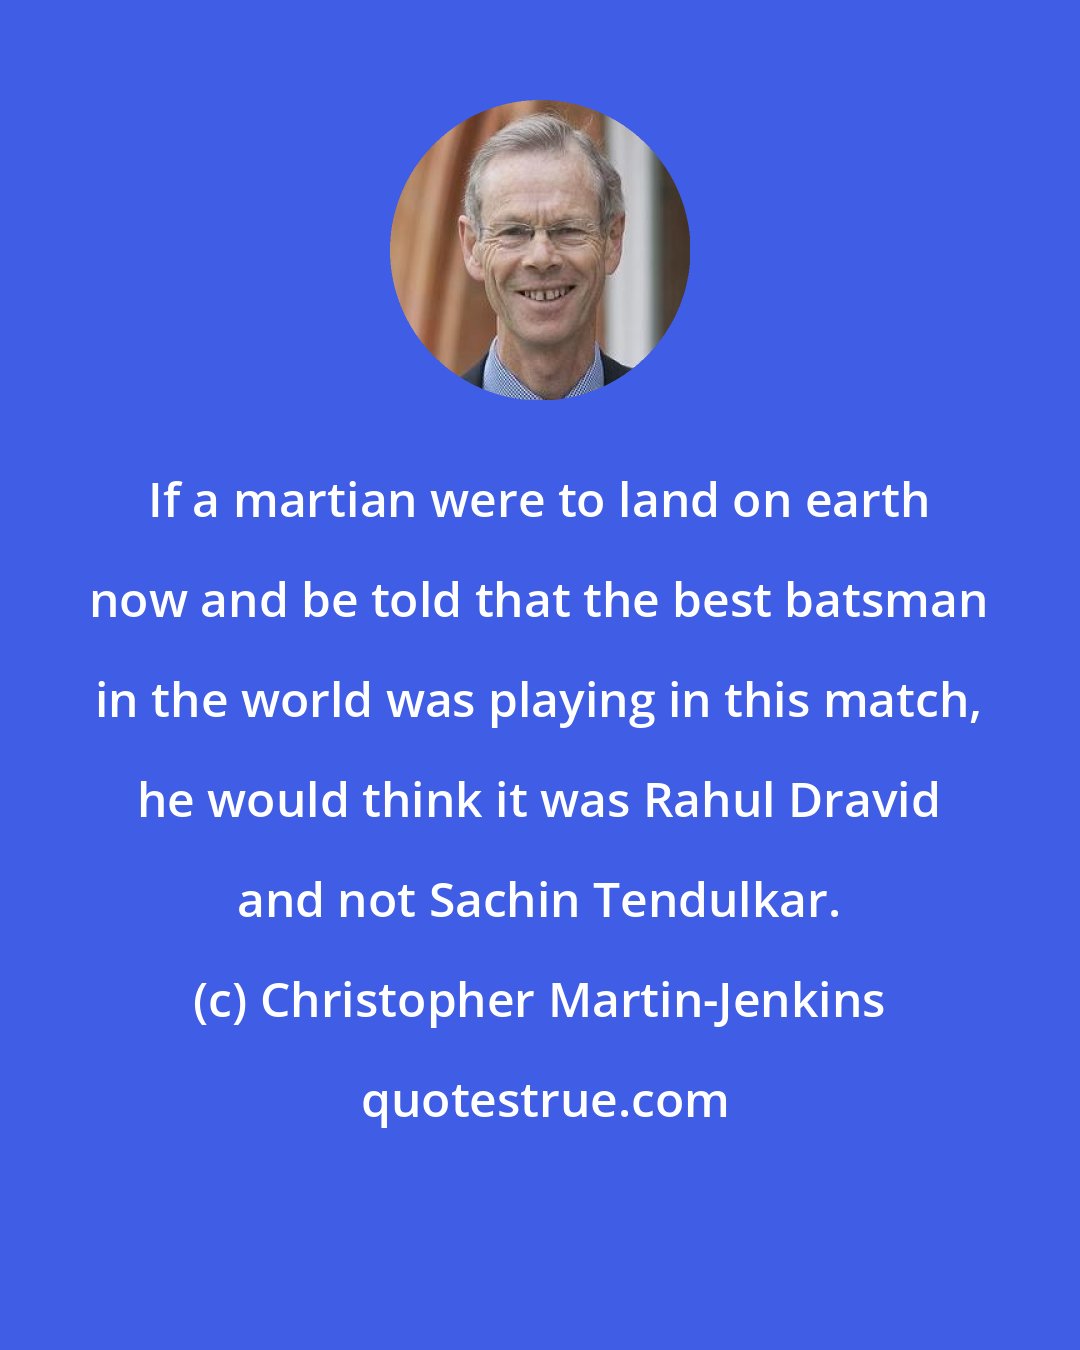 Christopher Martin-Jenkins: If a martian were to land on earth now and be told that the best batsman in the world was playing in this match, he would think it was Rahul Dravid and not Sachin Tendulkar.